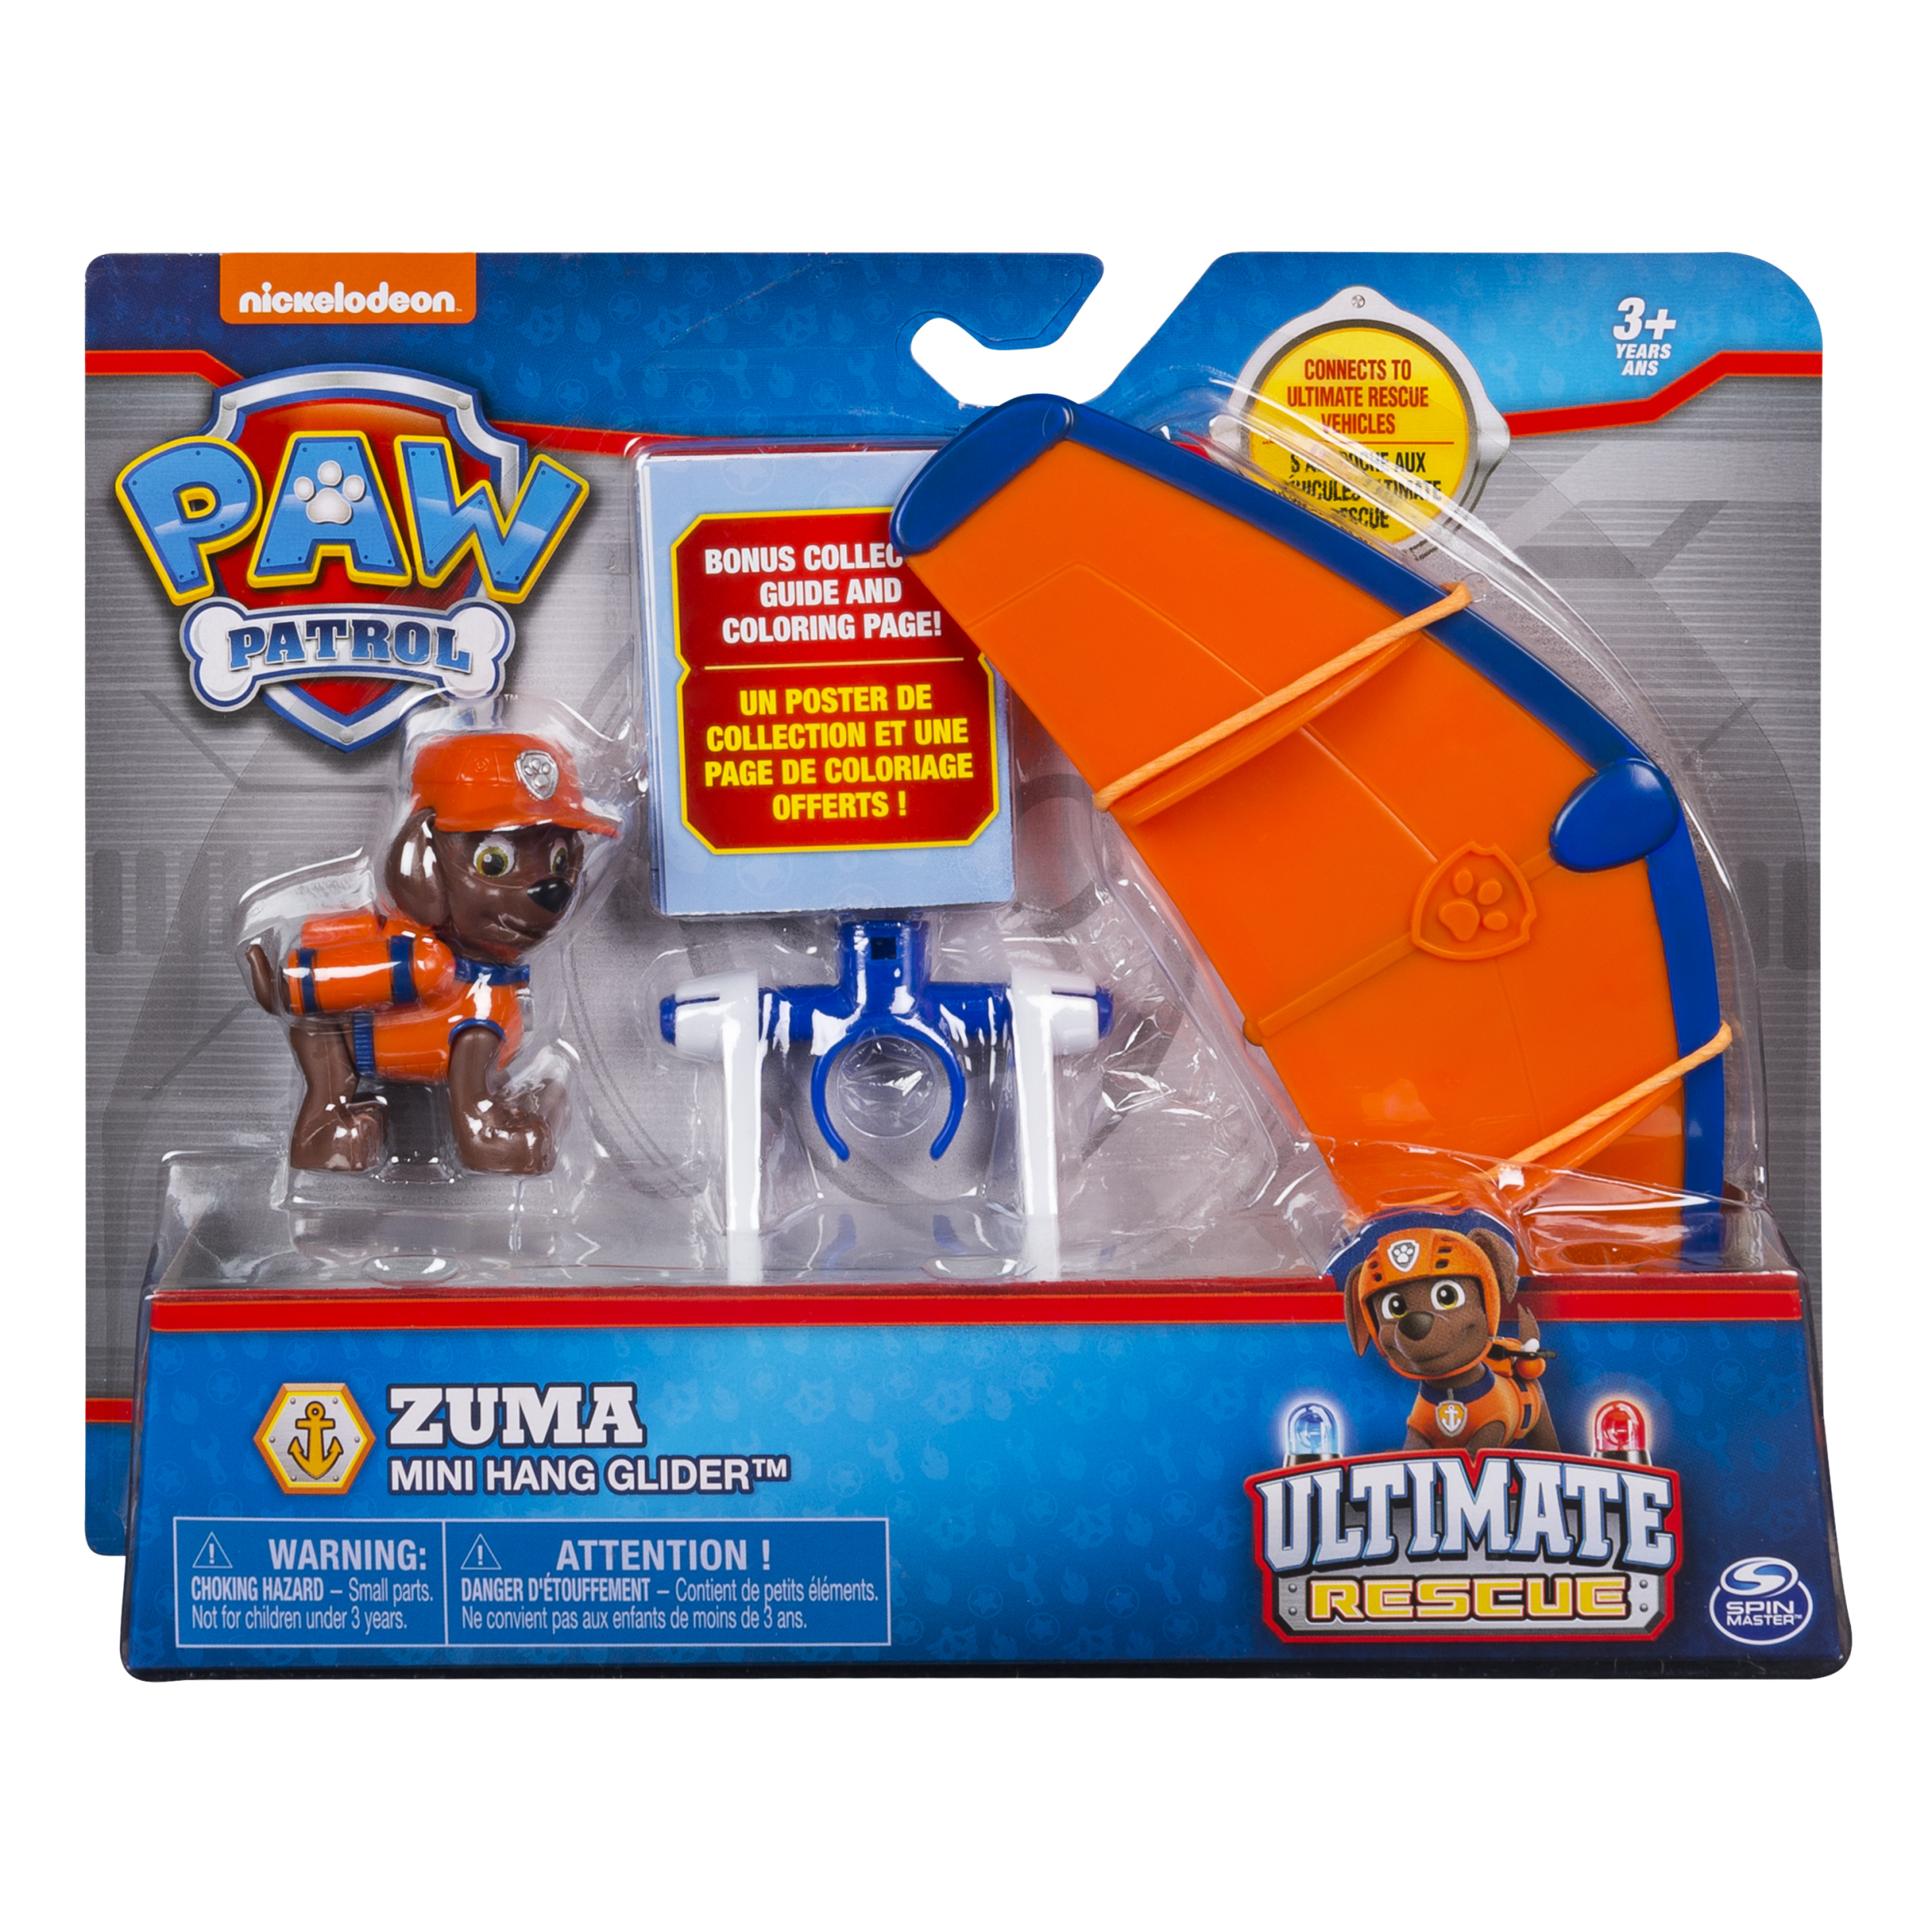 PAW Patrol Ultimate Rescue, Zuma’s Mini Hang Glider with Collectible Figure for Ages 3 and Up - image 2 of 6